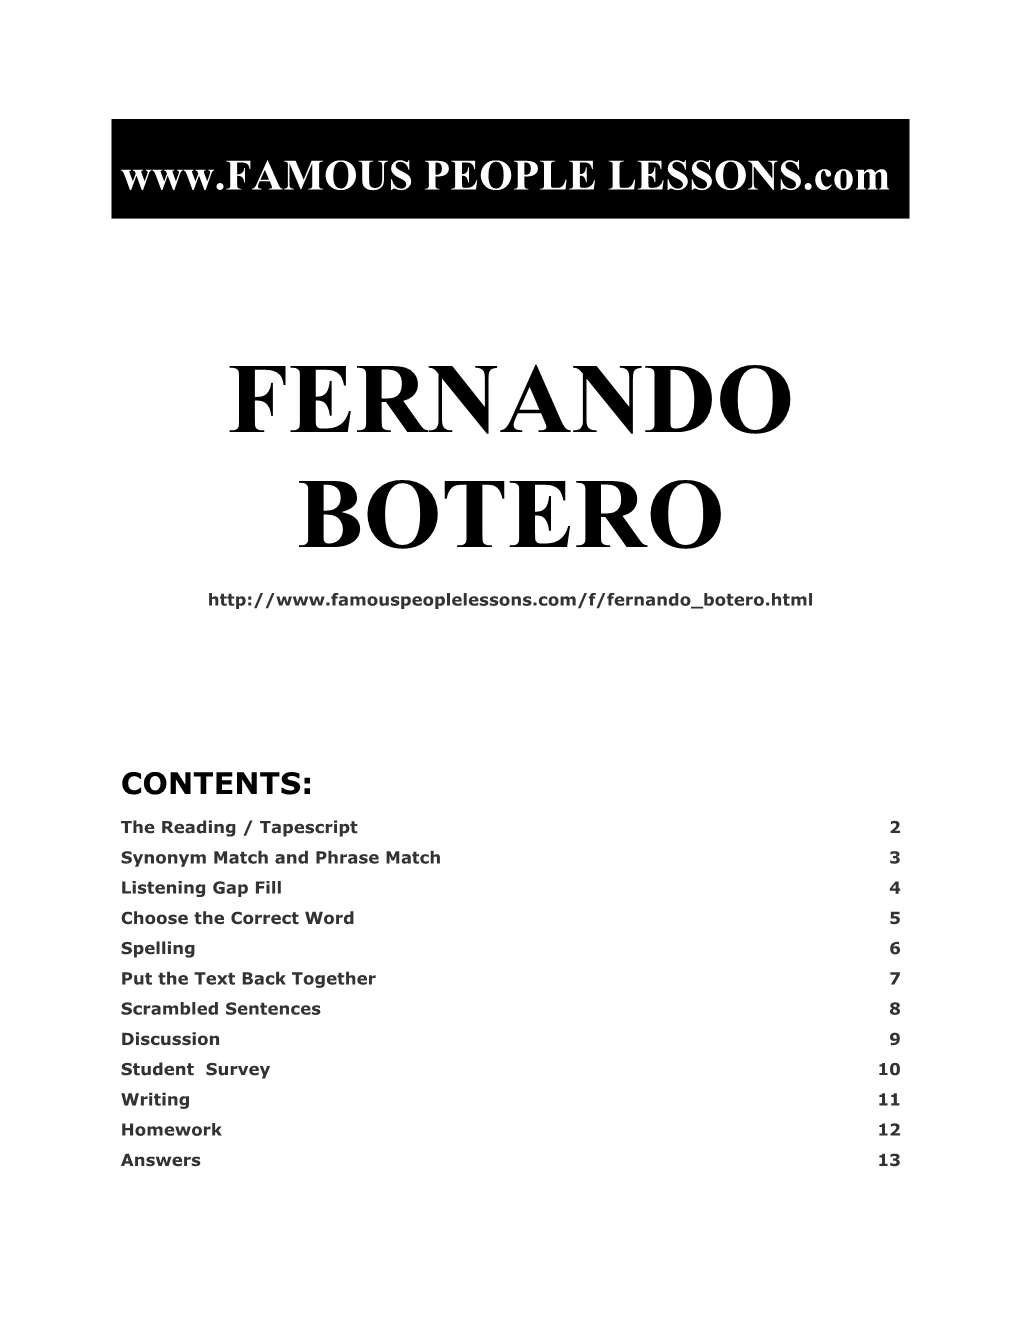 Famous People Lessons - Fernando Botero